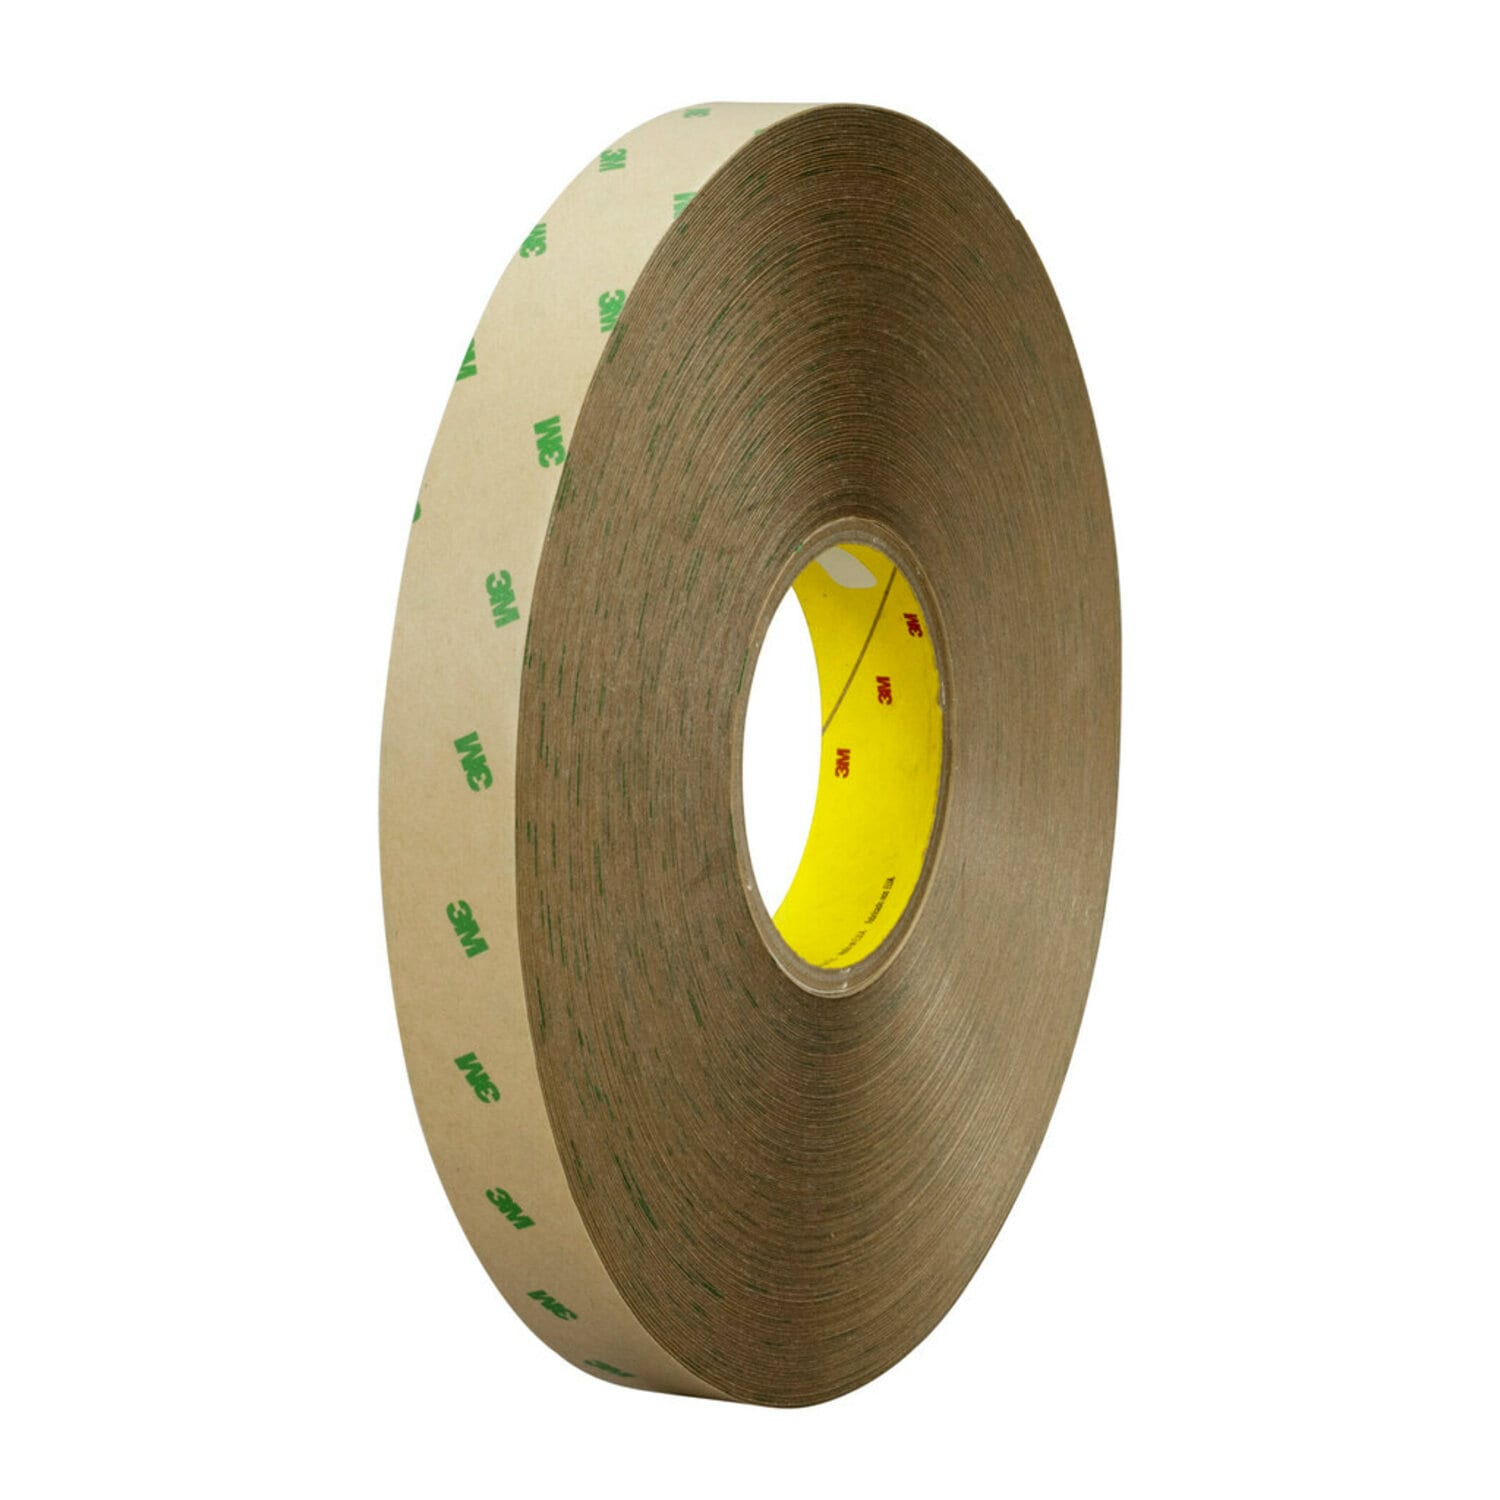 7010295461 - 3M Adhesive Transfer Tape 9505, Clear, 48 in x 60 yd, 5 mil, 1 roll per
case